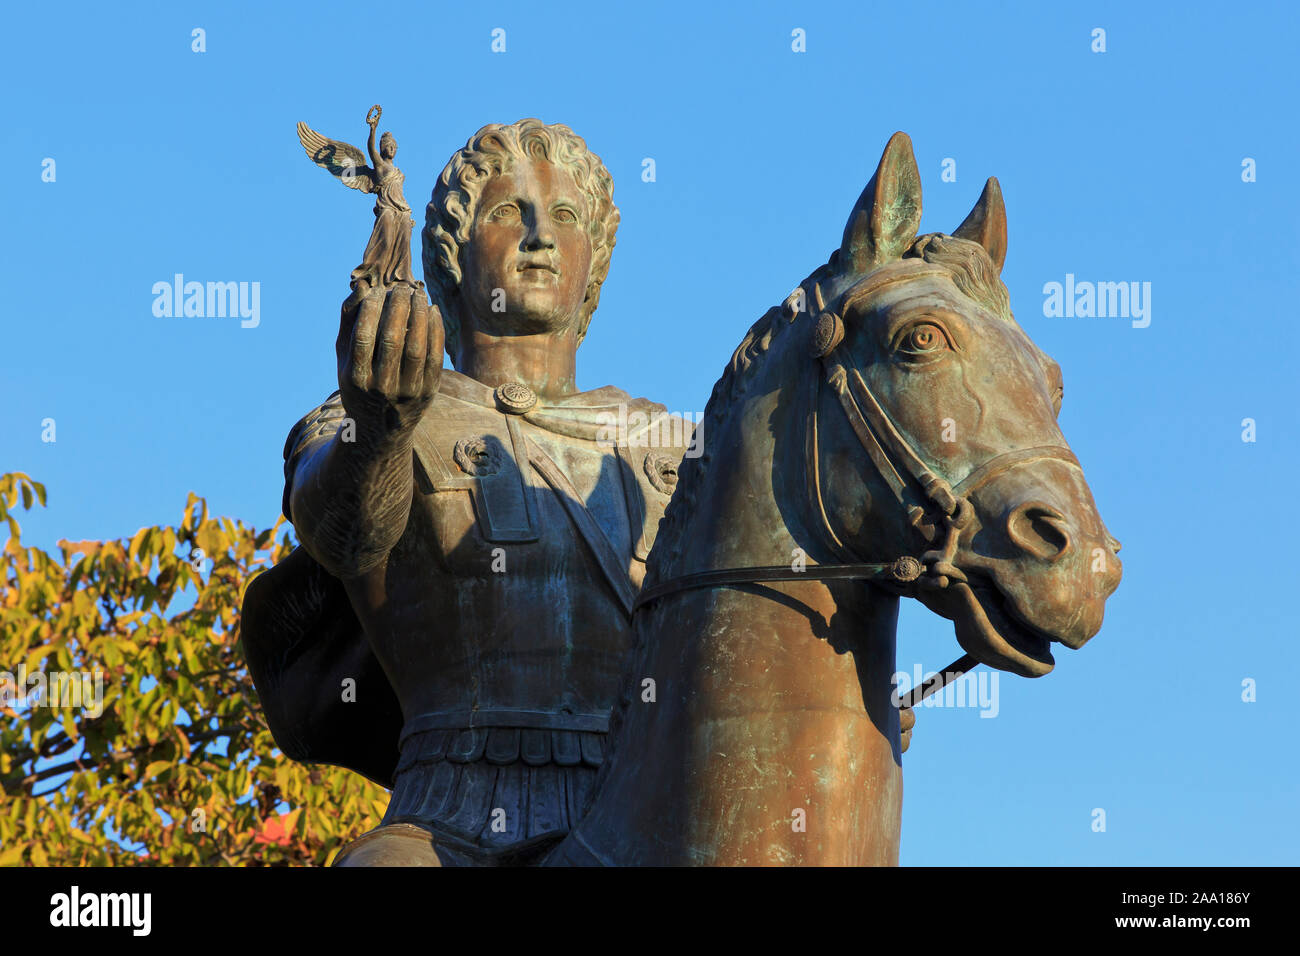 Equestrian monument to Alexander The Great (356 BC - 323 BC) holding the  goddess Nike (Victory) in his hand in Pella (Macedonia), Greece Stock Photo  - Alamy